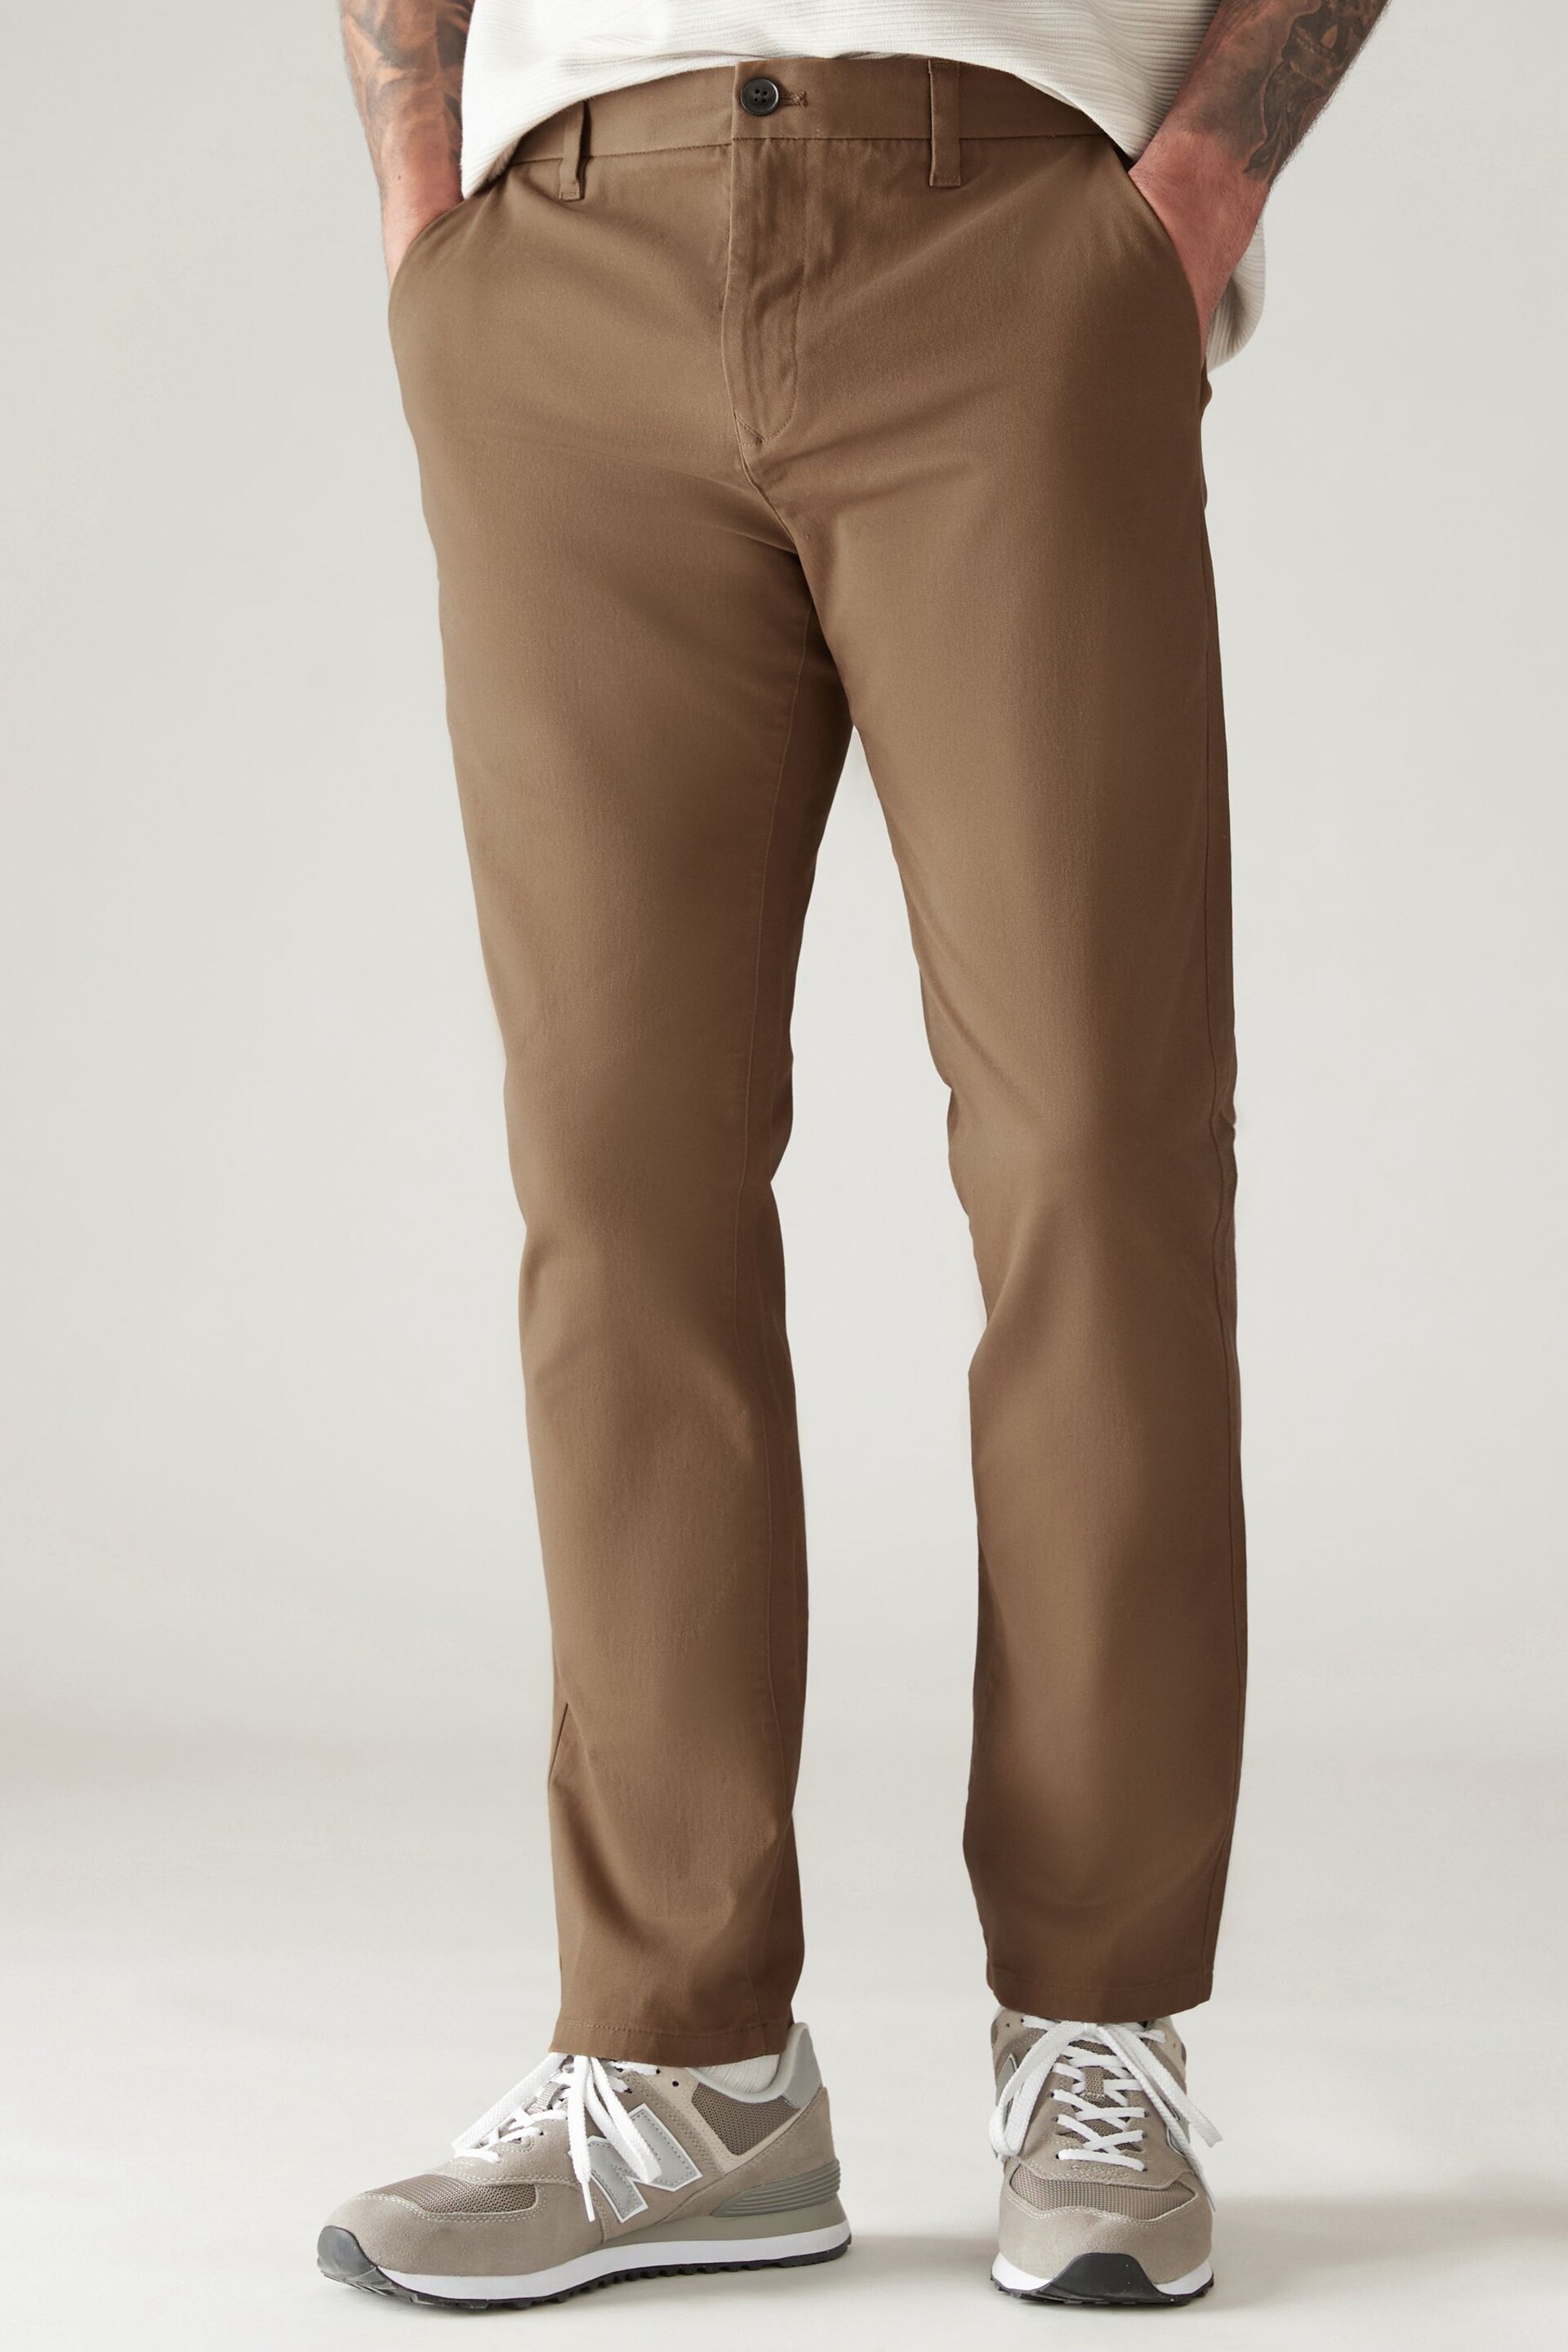 French Navy/Tan Slim Stretch Chino Trousers 2 Pack - Image 5 of 12